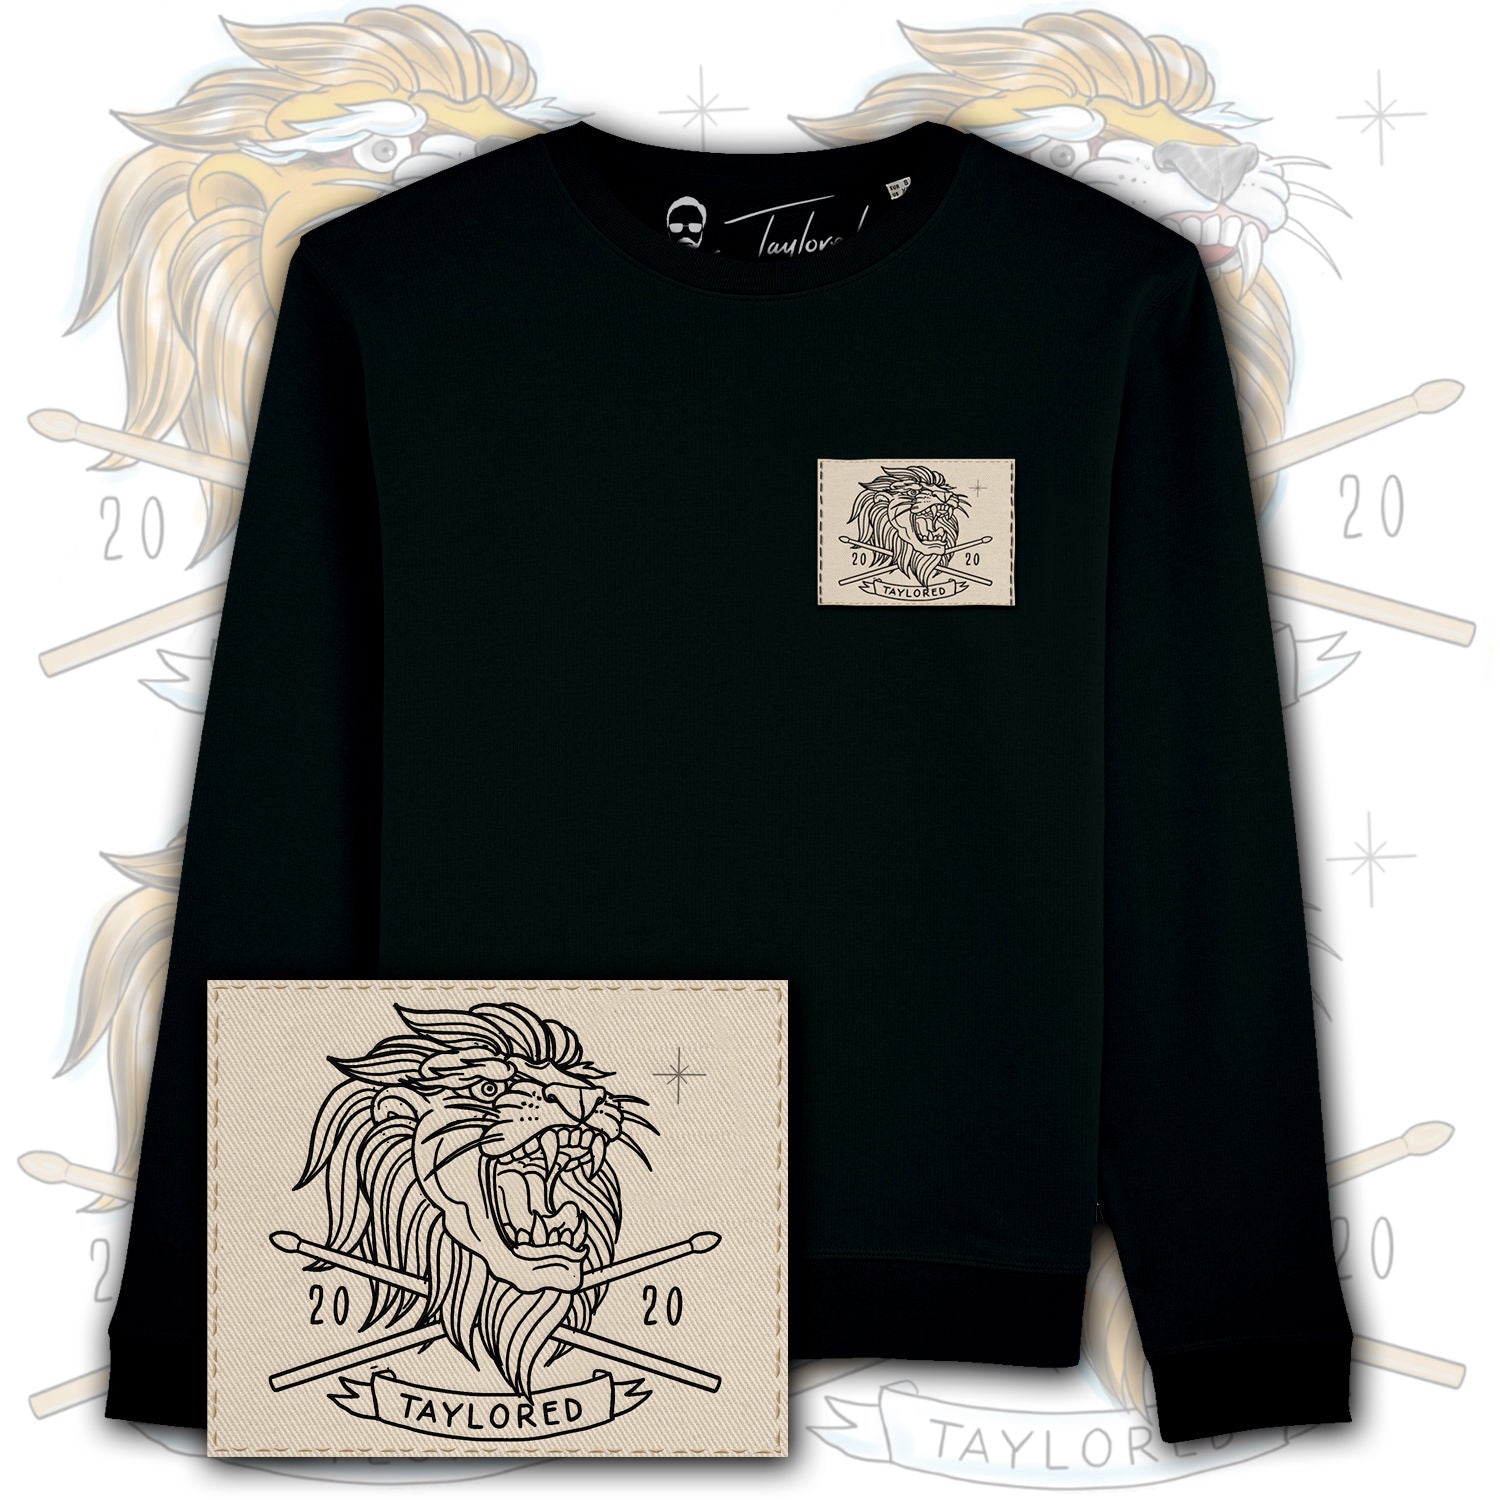 Roger Taylor - 'Taylored' 2020 Embroidered Lion Patch Sweatshirt